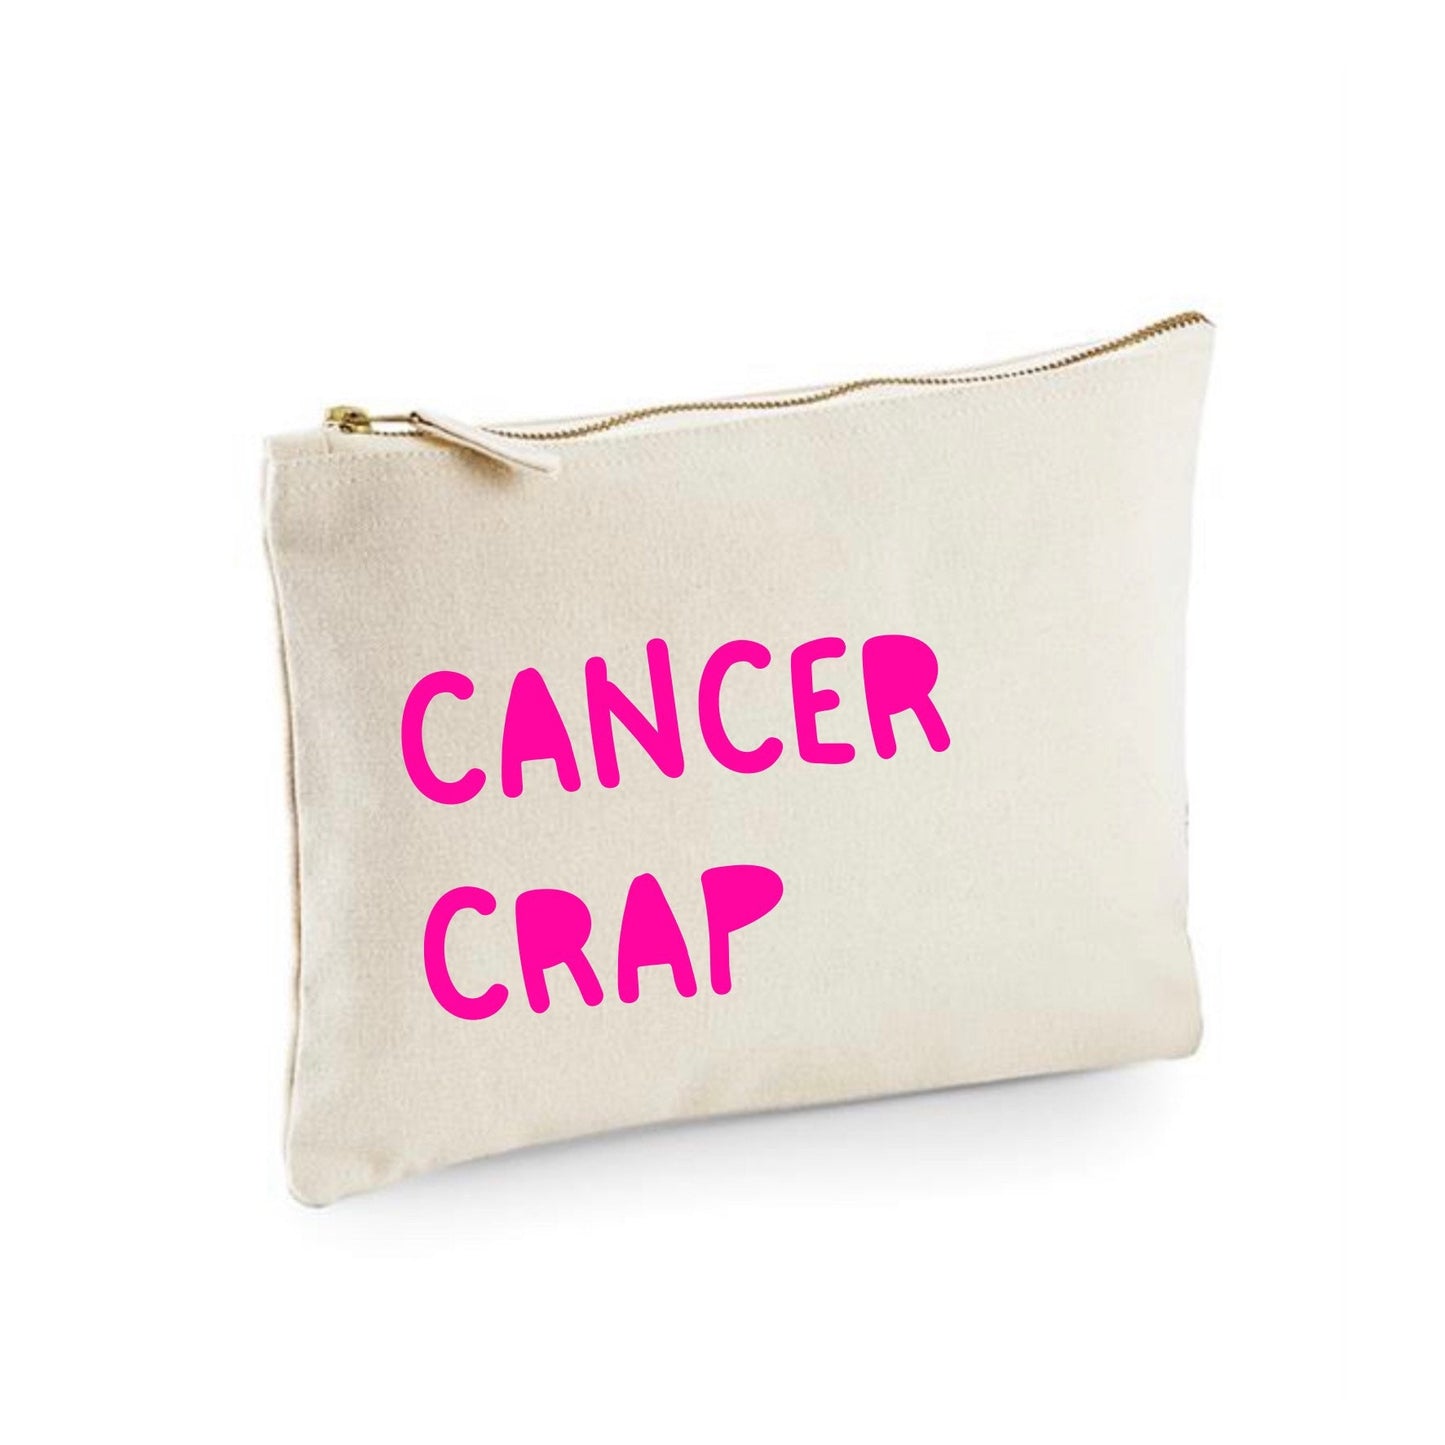 Cancer crap pouch, chemo medication bag, chemo crap bag, gift for friend going through chemo